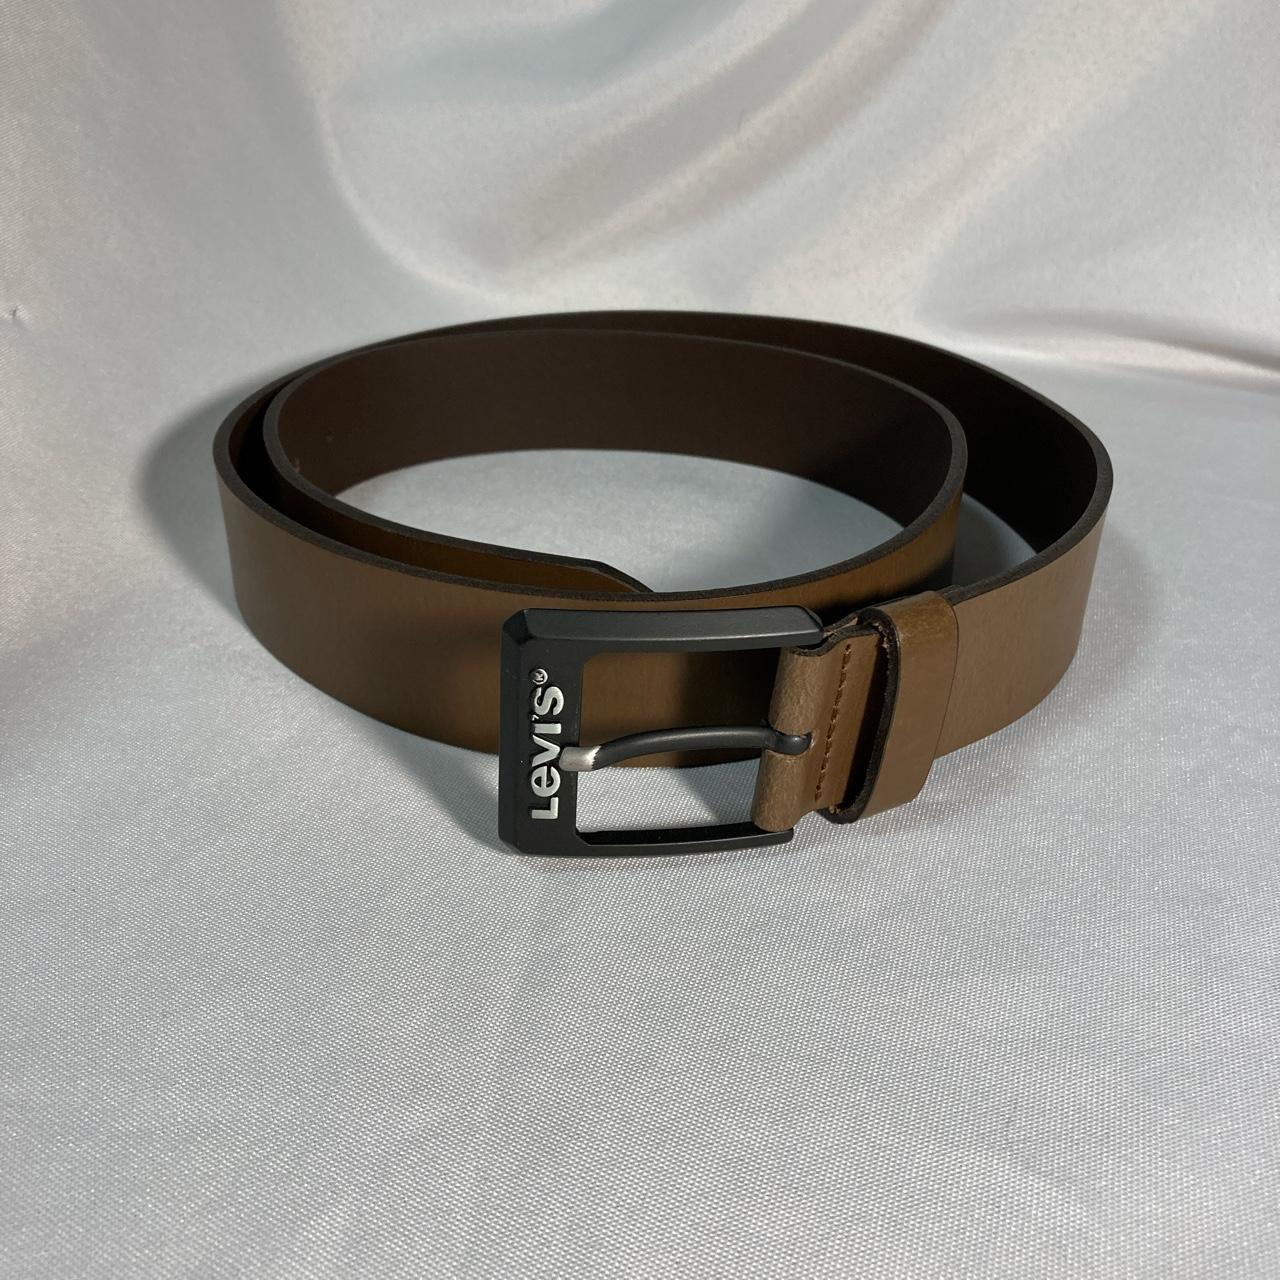 Levi’s leather belt with square buckle Size... - Depop